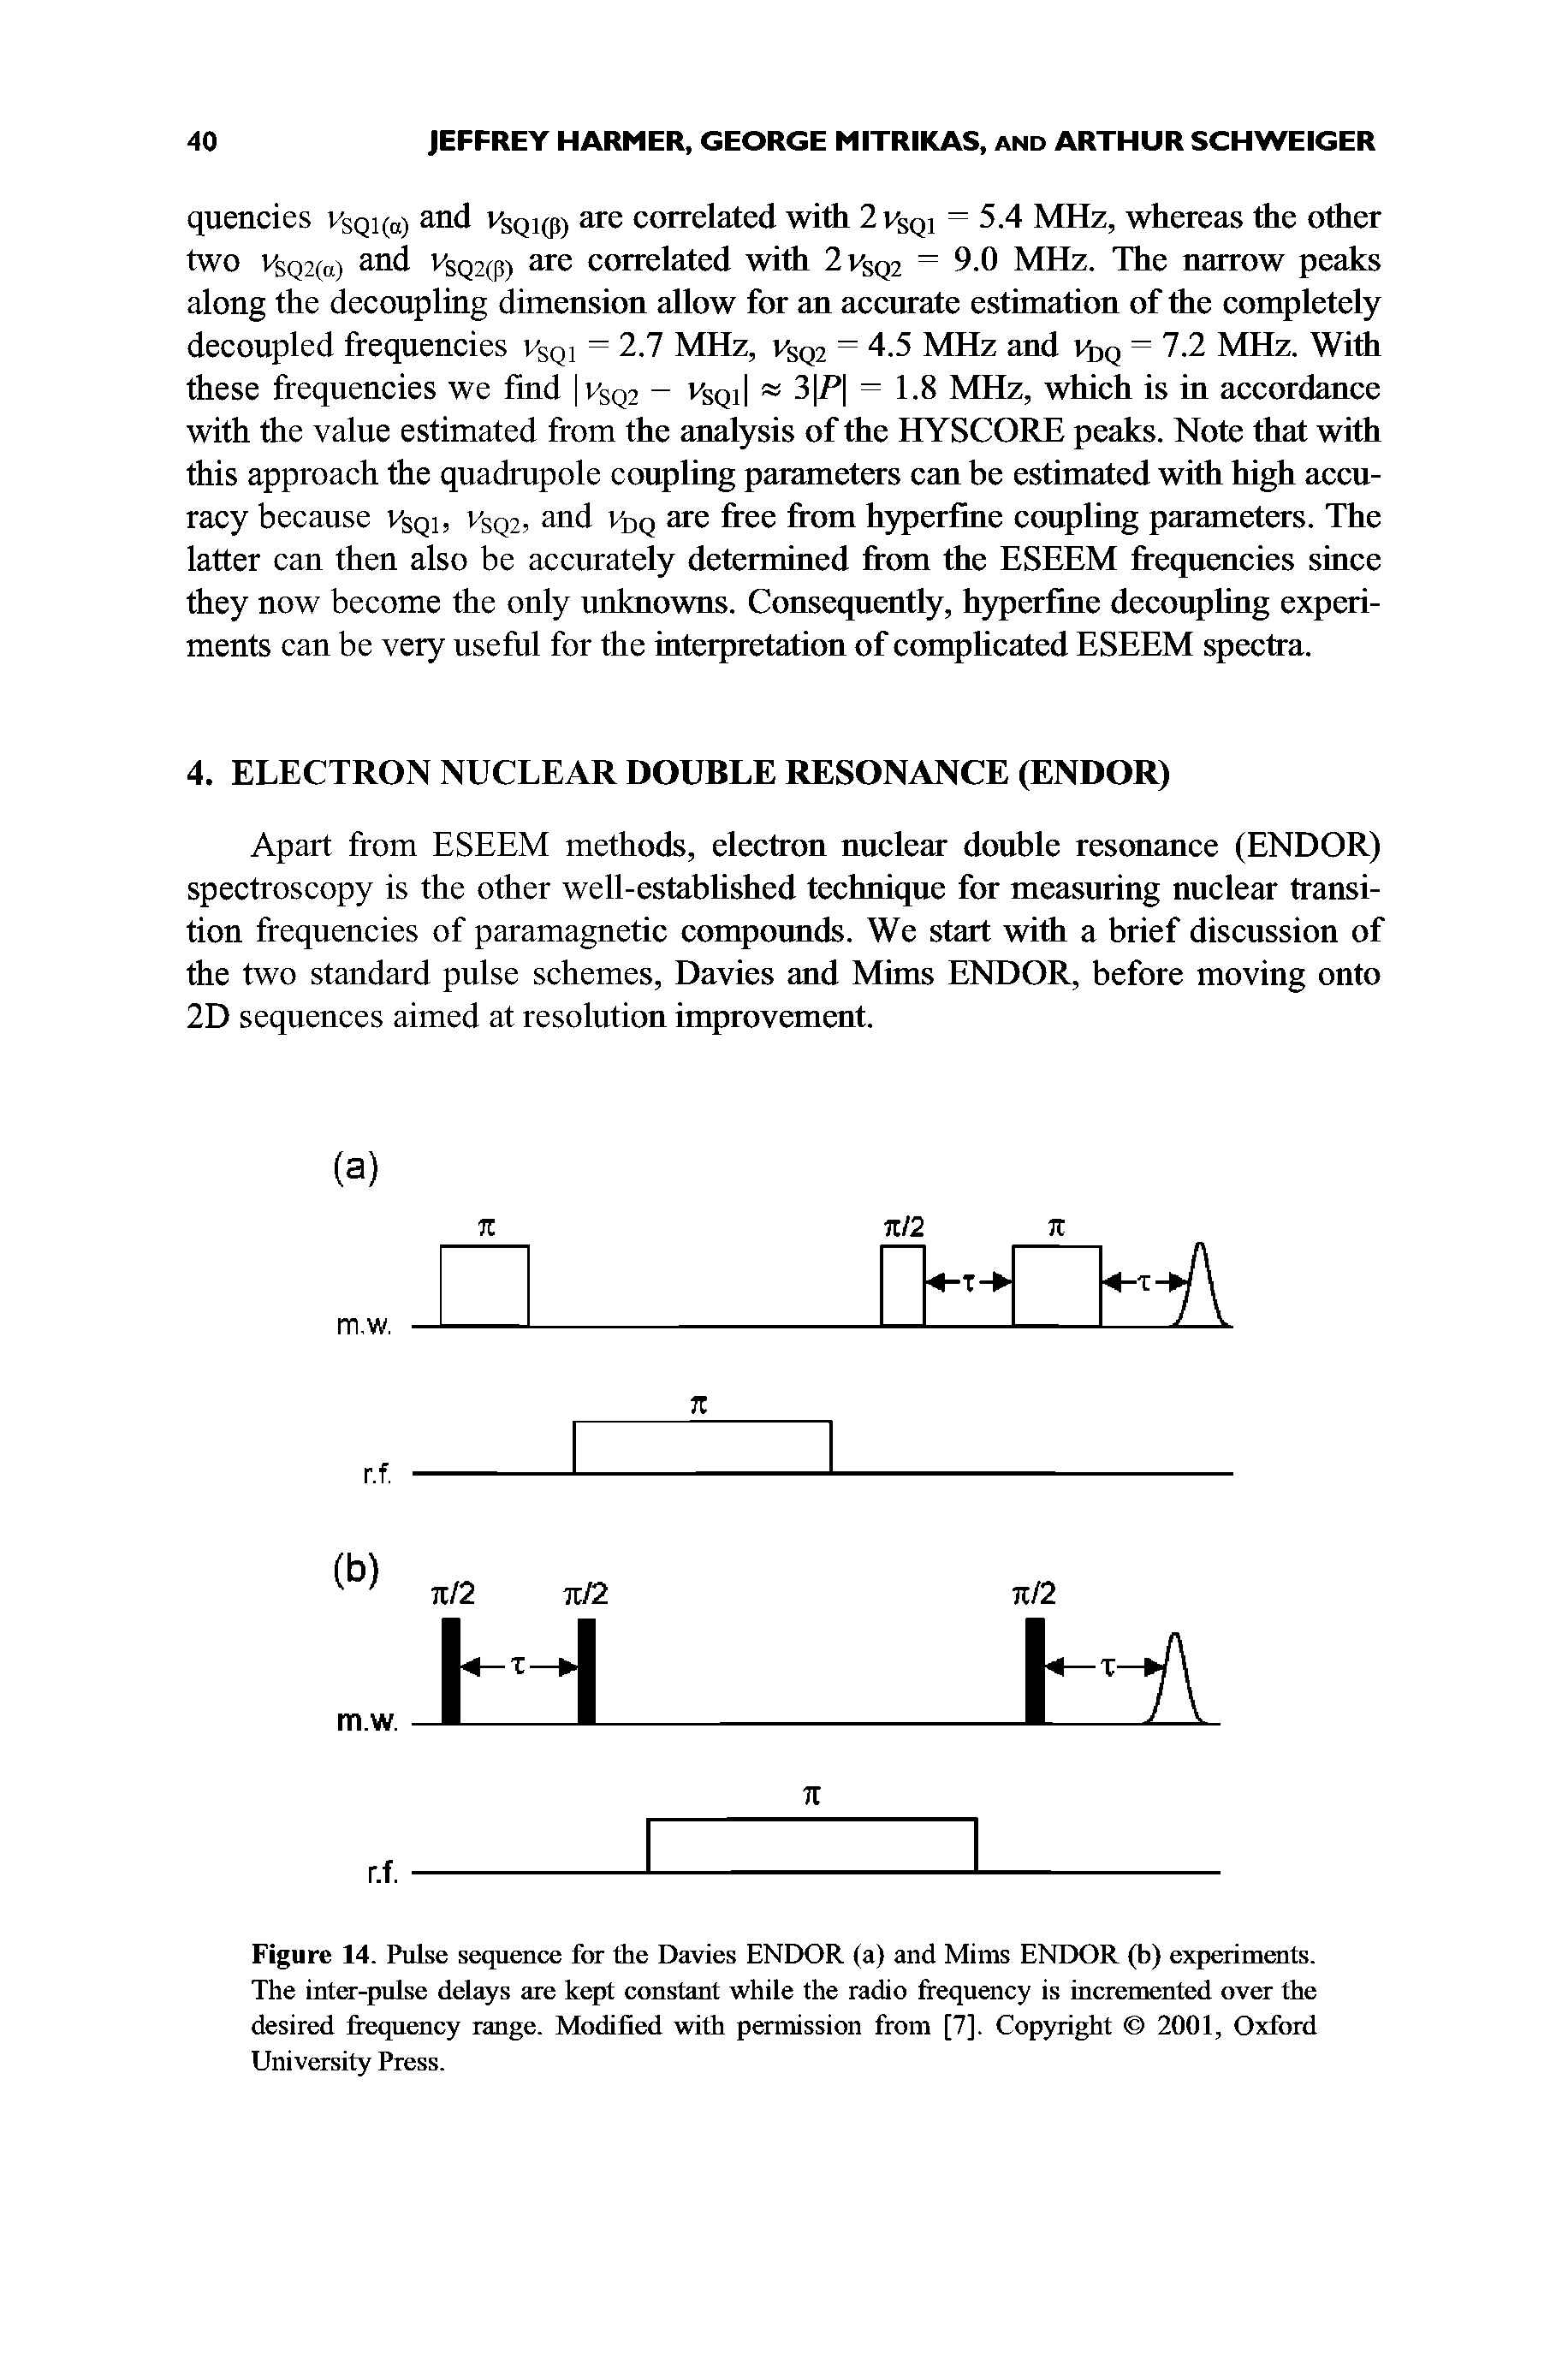 Figure 14. Pulse sequence Pot the Davies ENDOR (a) and Mims ENDOR (b) experiments. The inter-pulse delays are kept constant while the radio frequency is incremented over the desired frequency range. Modified with permission from [7]. Copyright 2001, Oxford University Press.